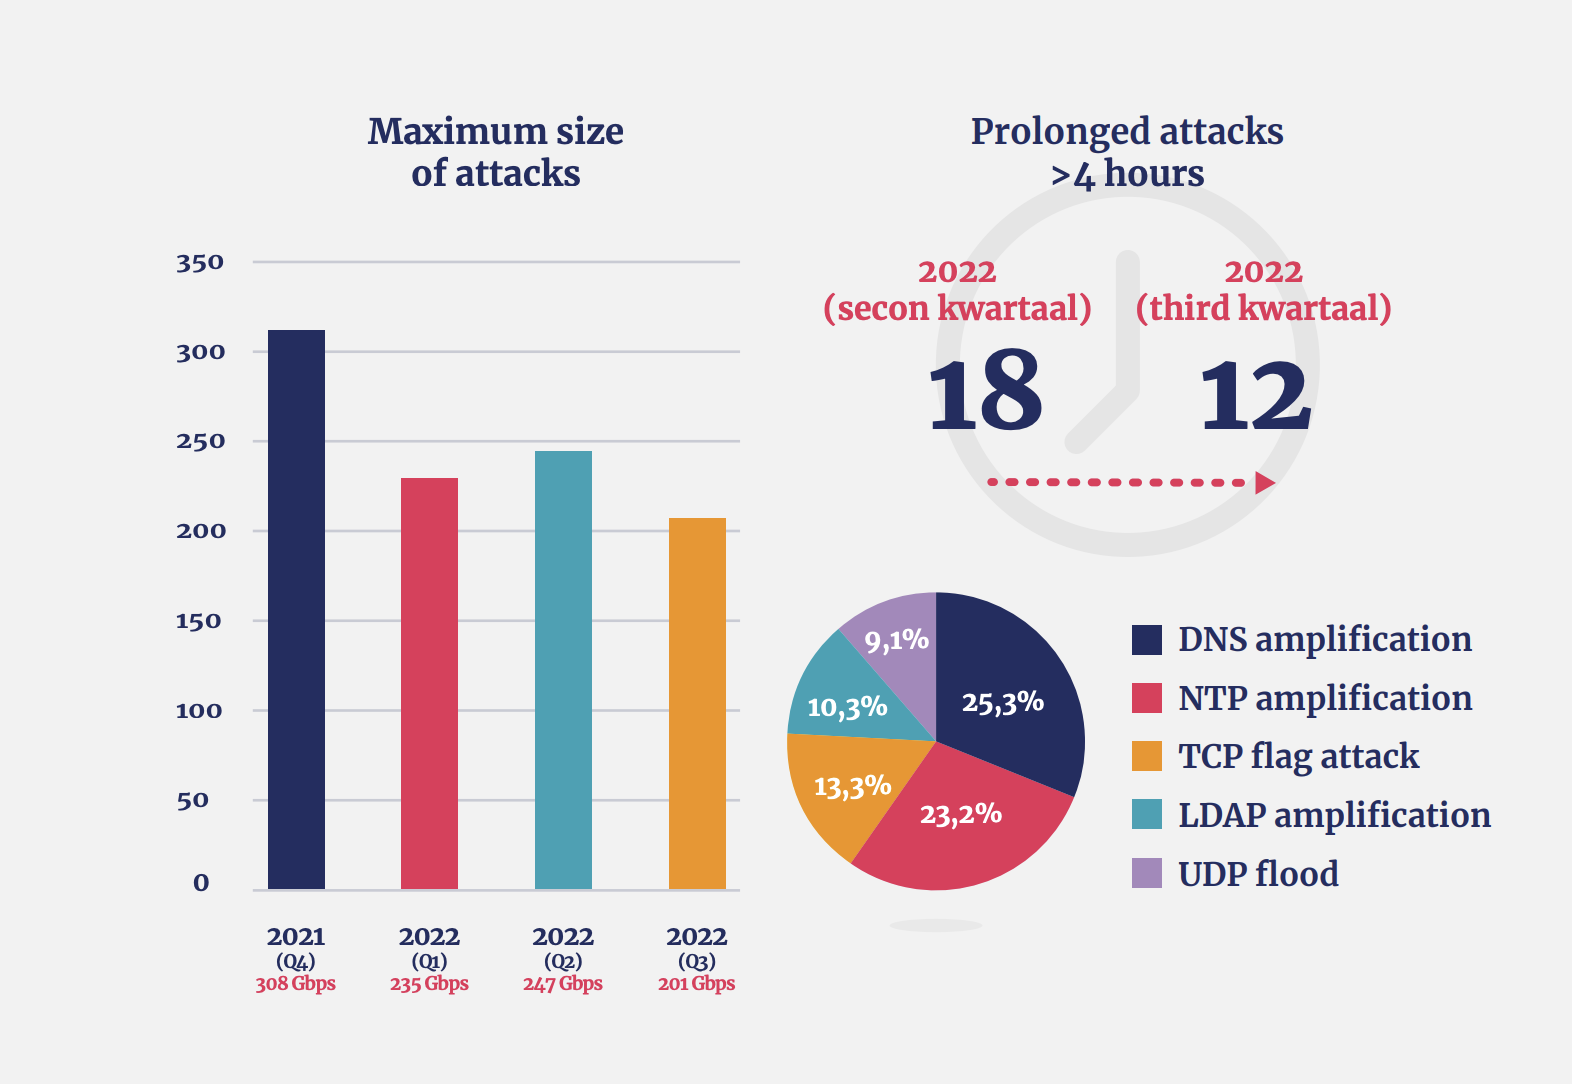 Figure 1: Types of DDoS attack and maximum attack sizes 2021-2022